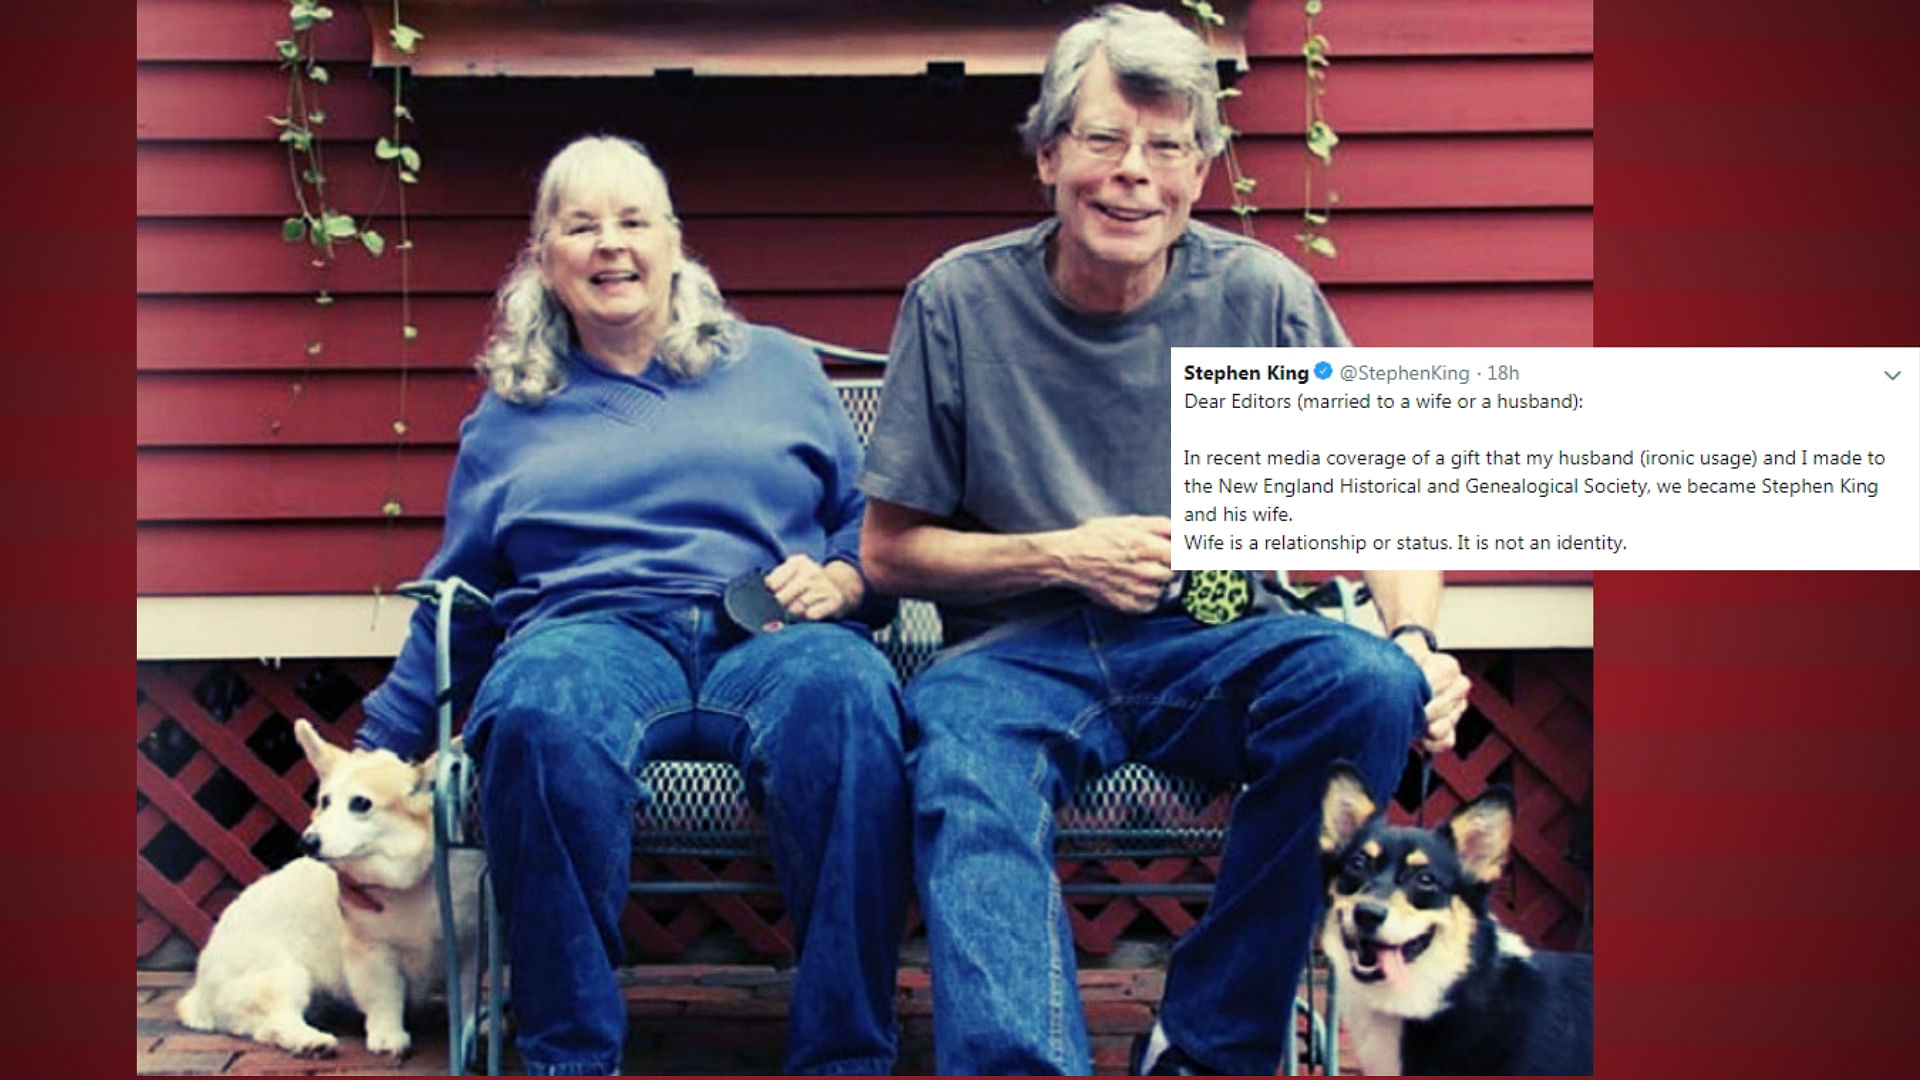 Tabitha and Stephen King hit out at the media for sexist headlines in a series of tweets.